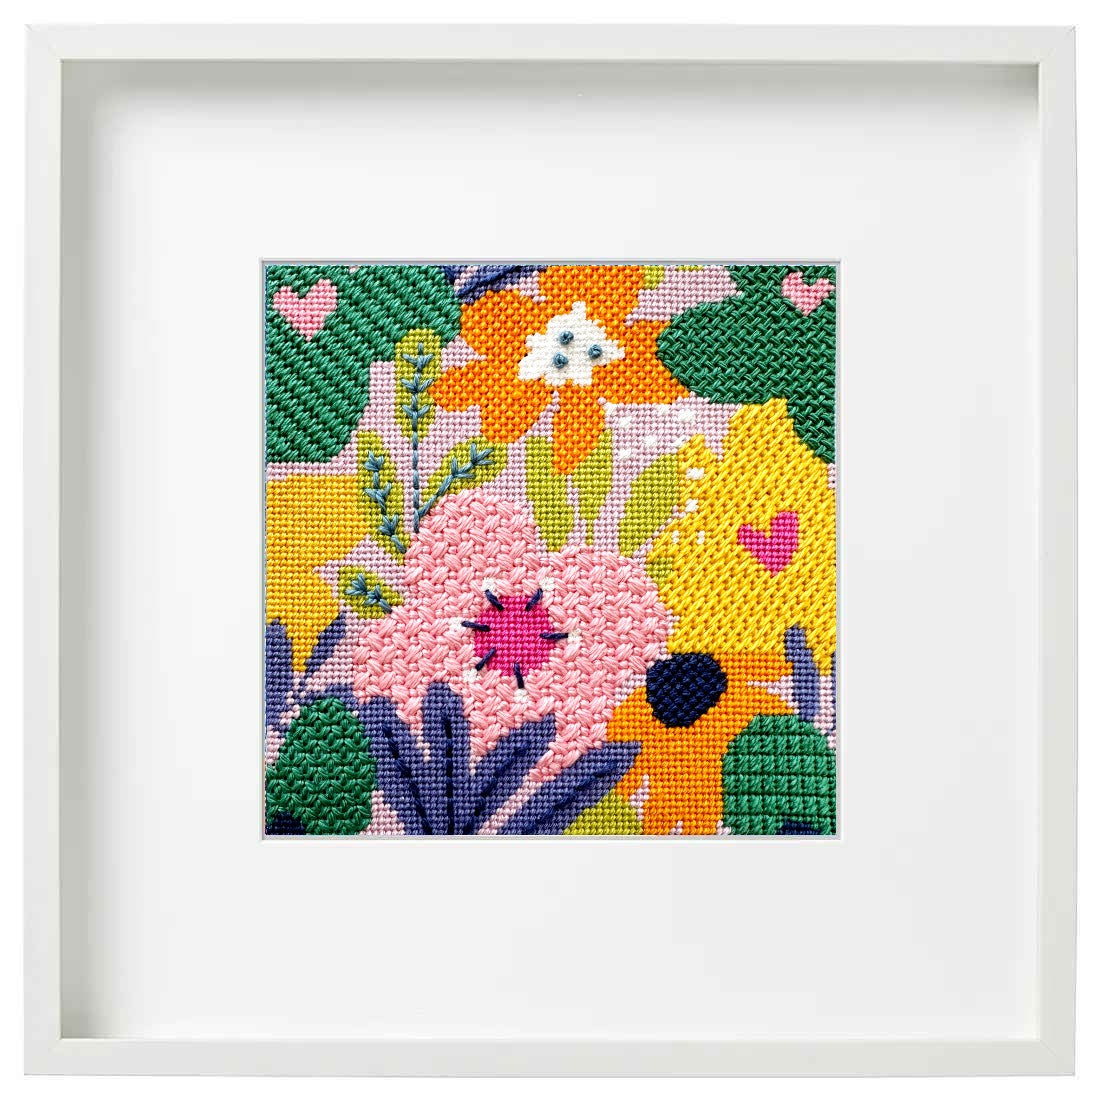 Flower Market needlepoint kit with stitch guide